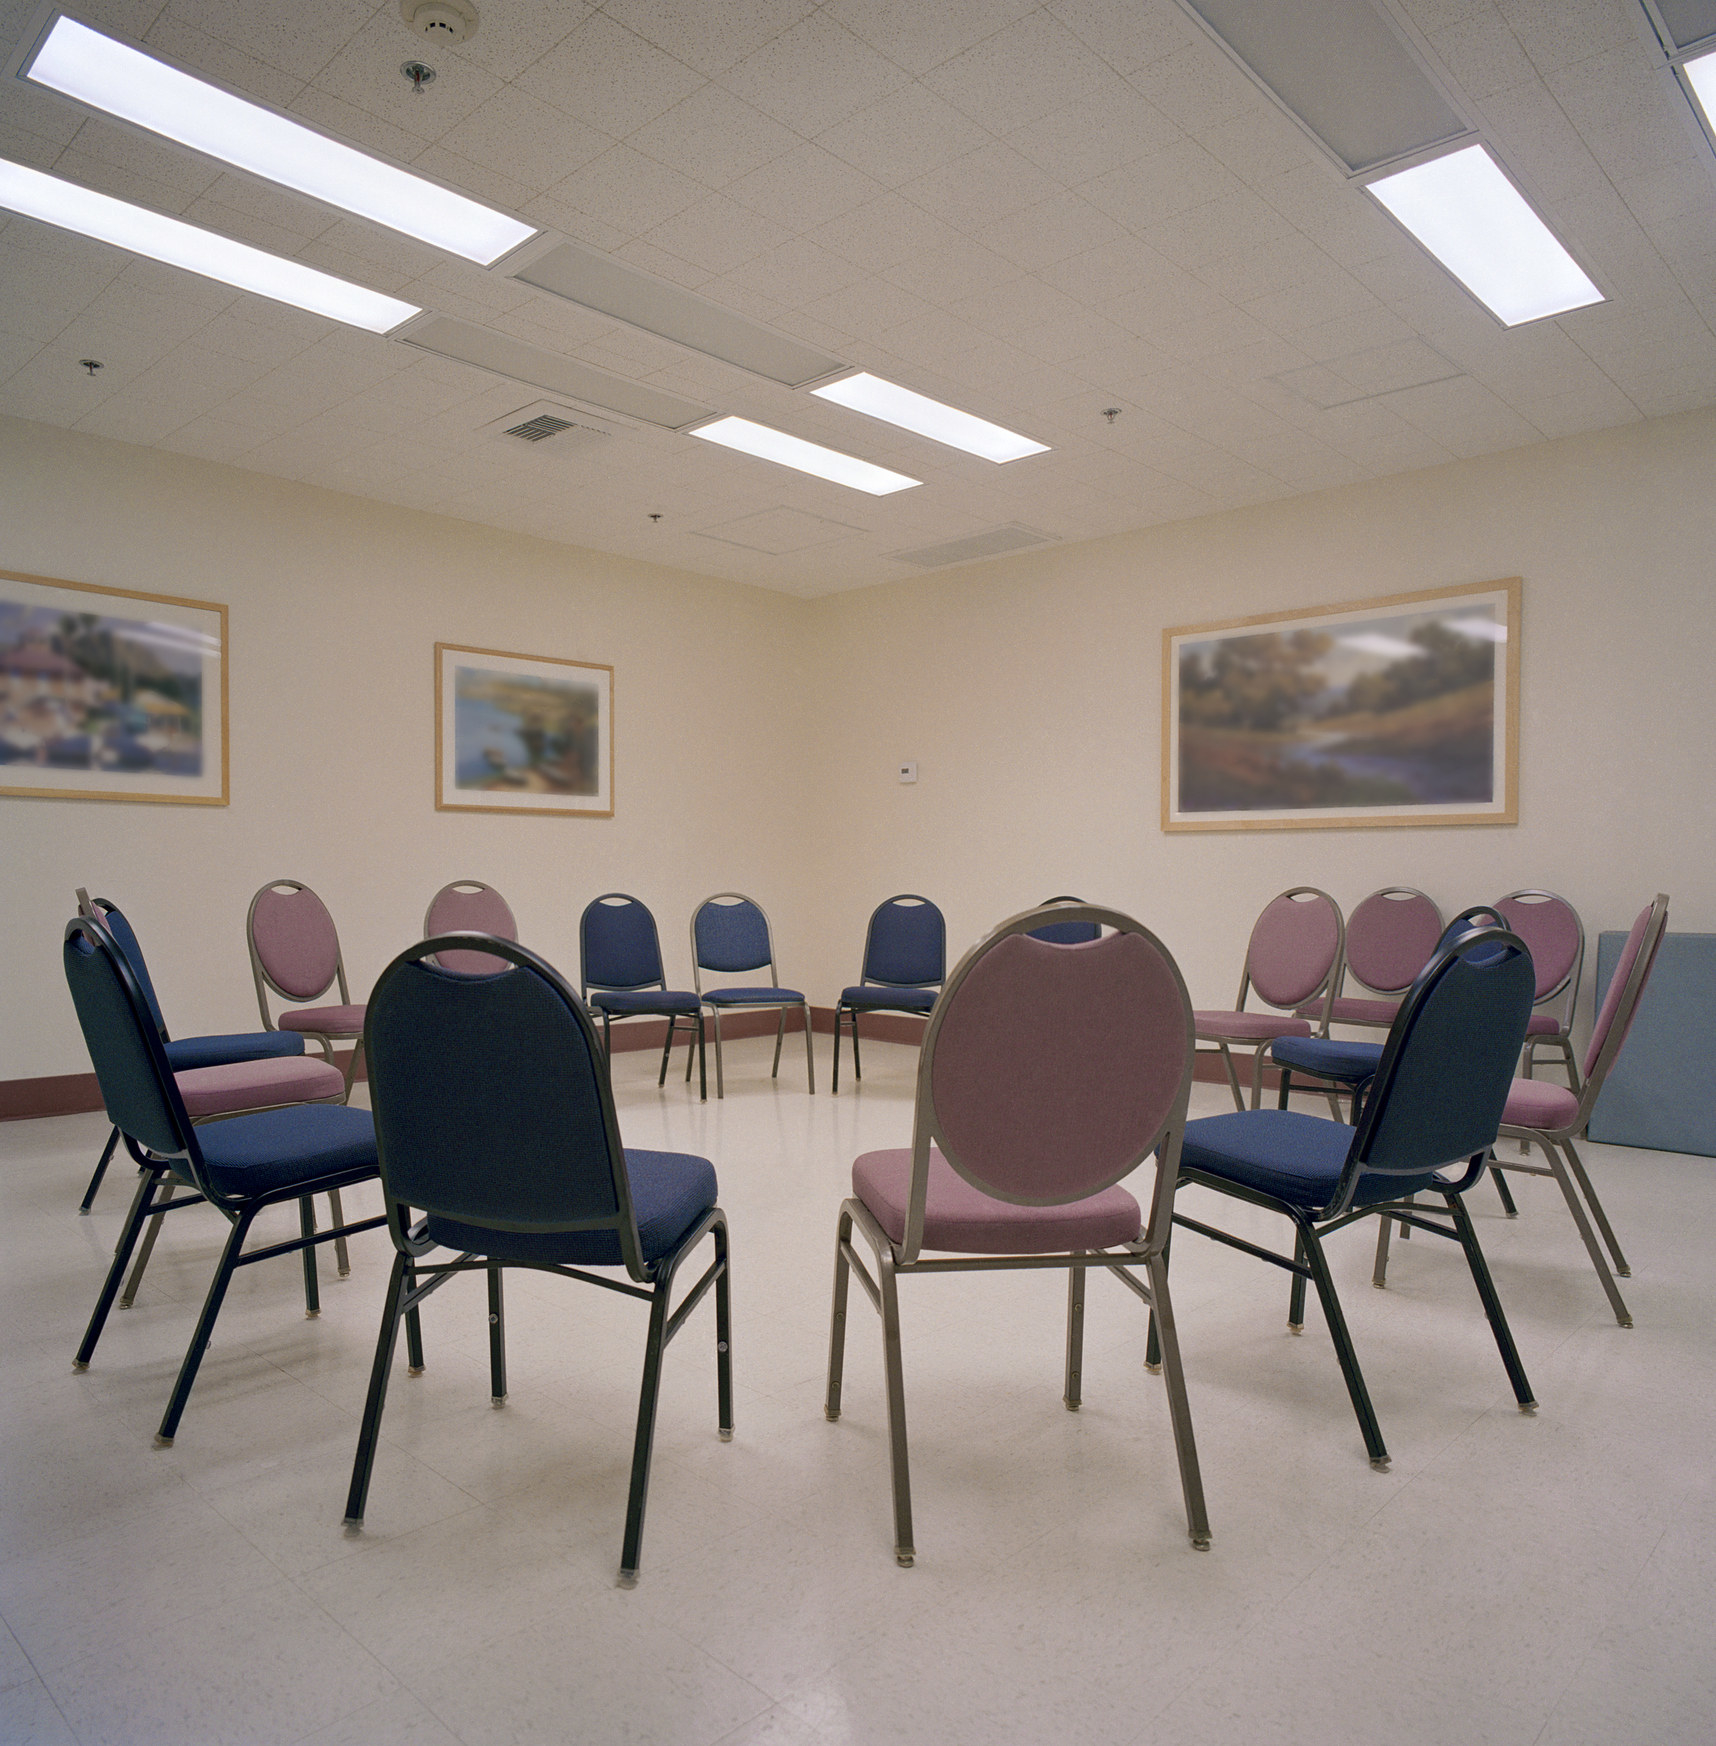 Empty chairs in a circle